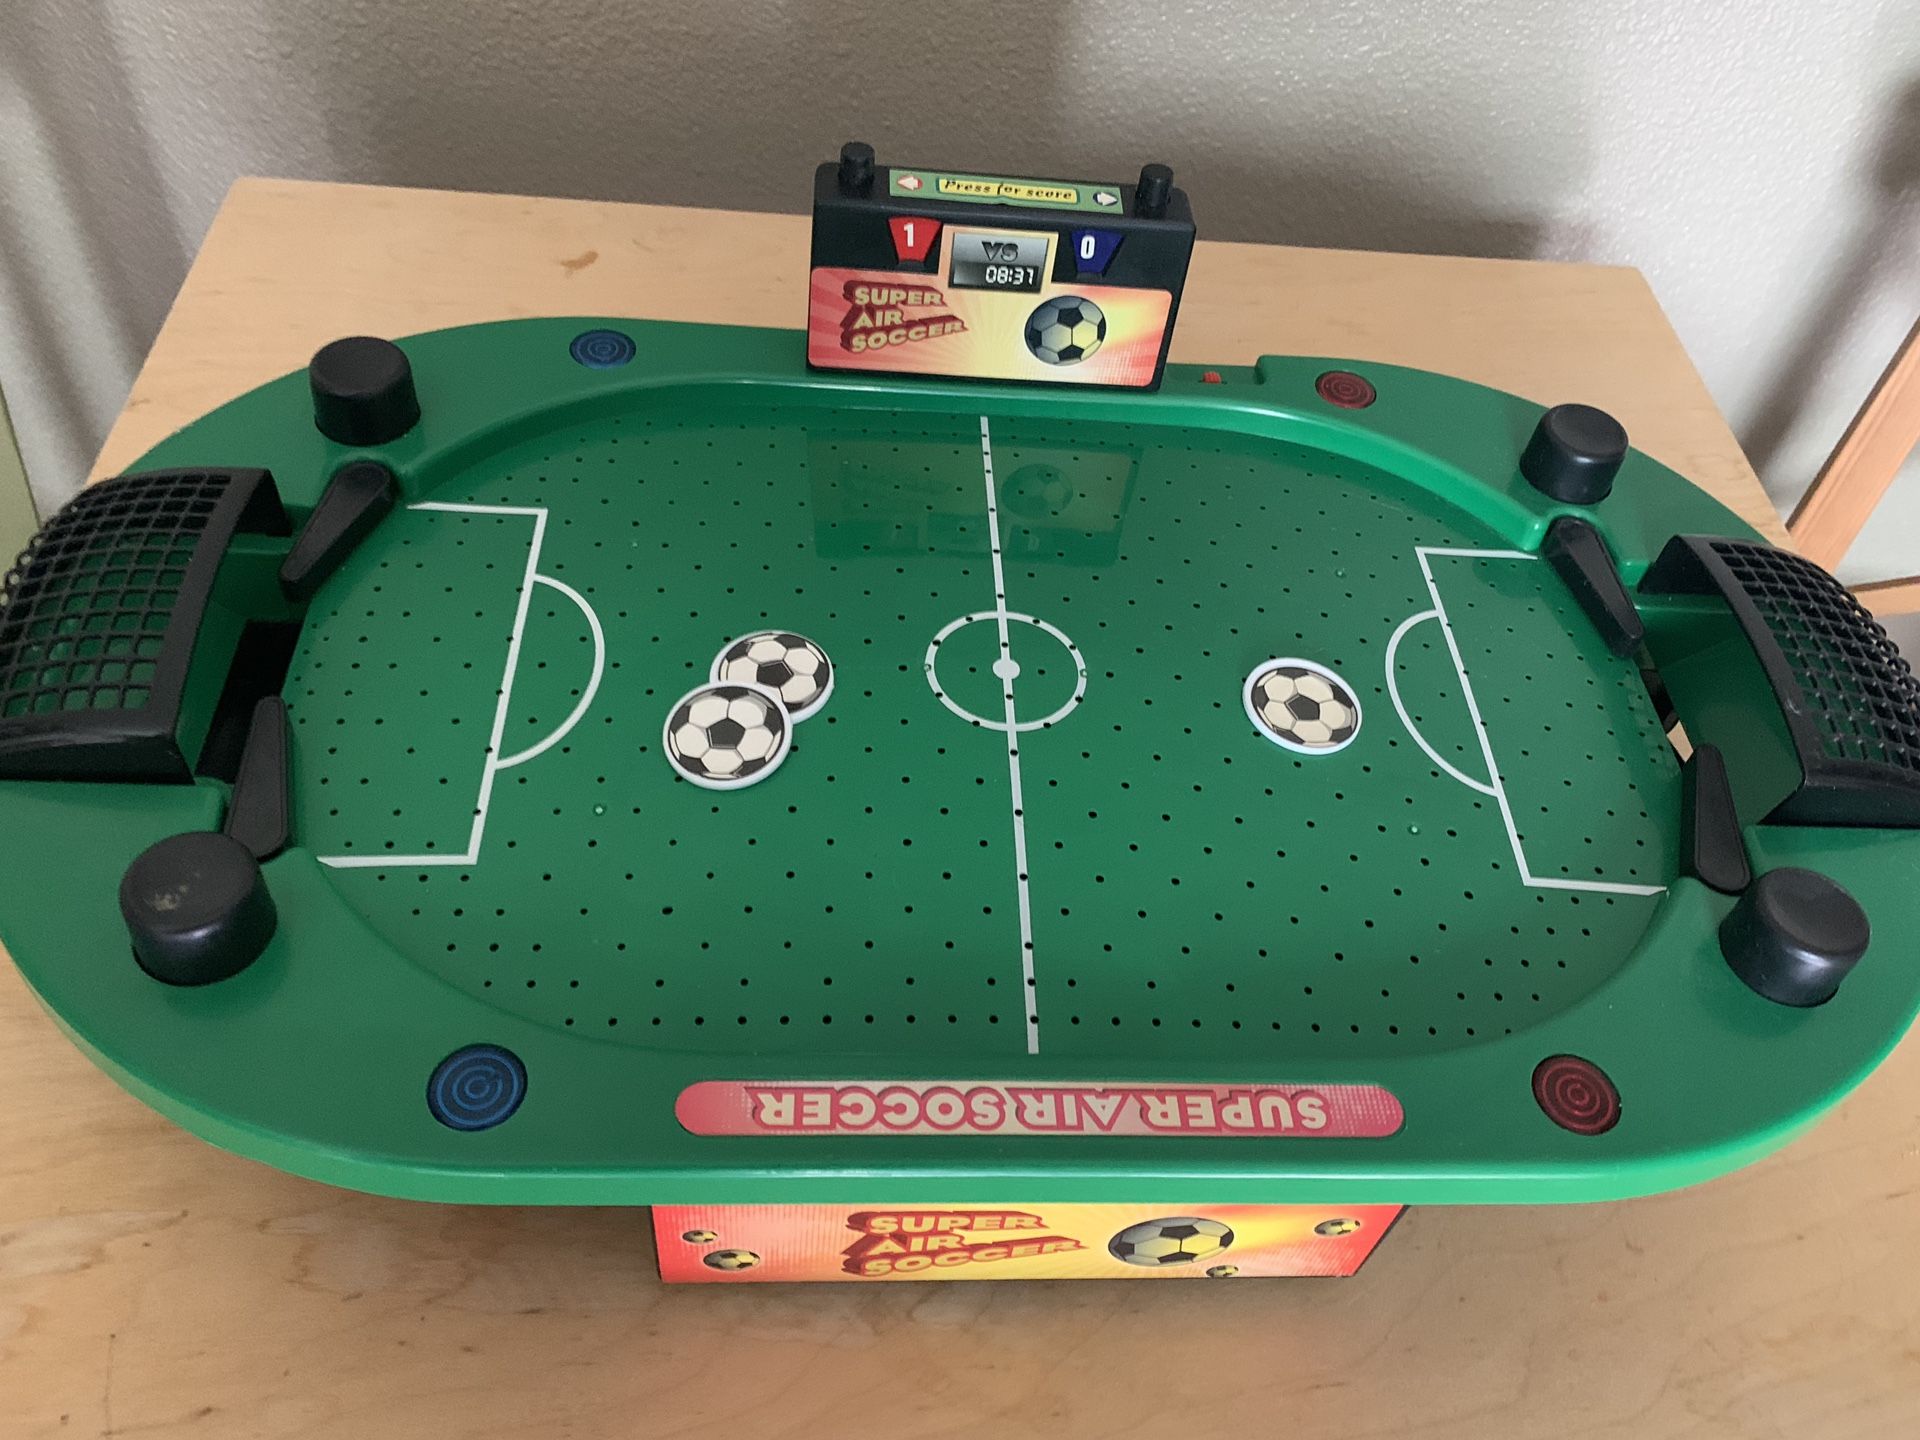 ⚽️ Super Air Soccer Kids Game with working batteries